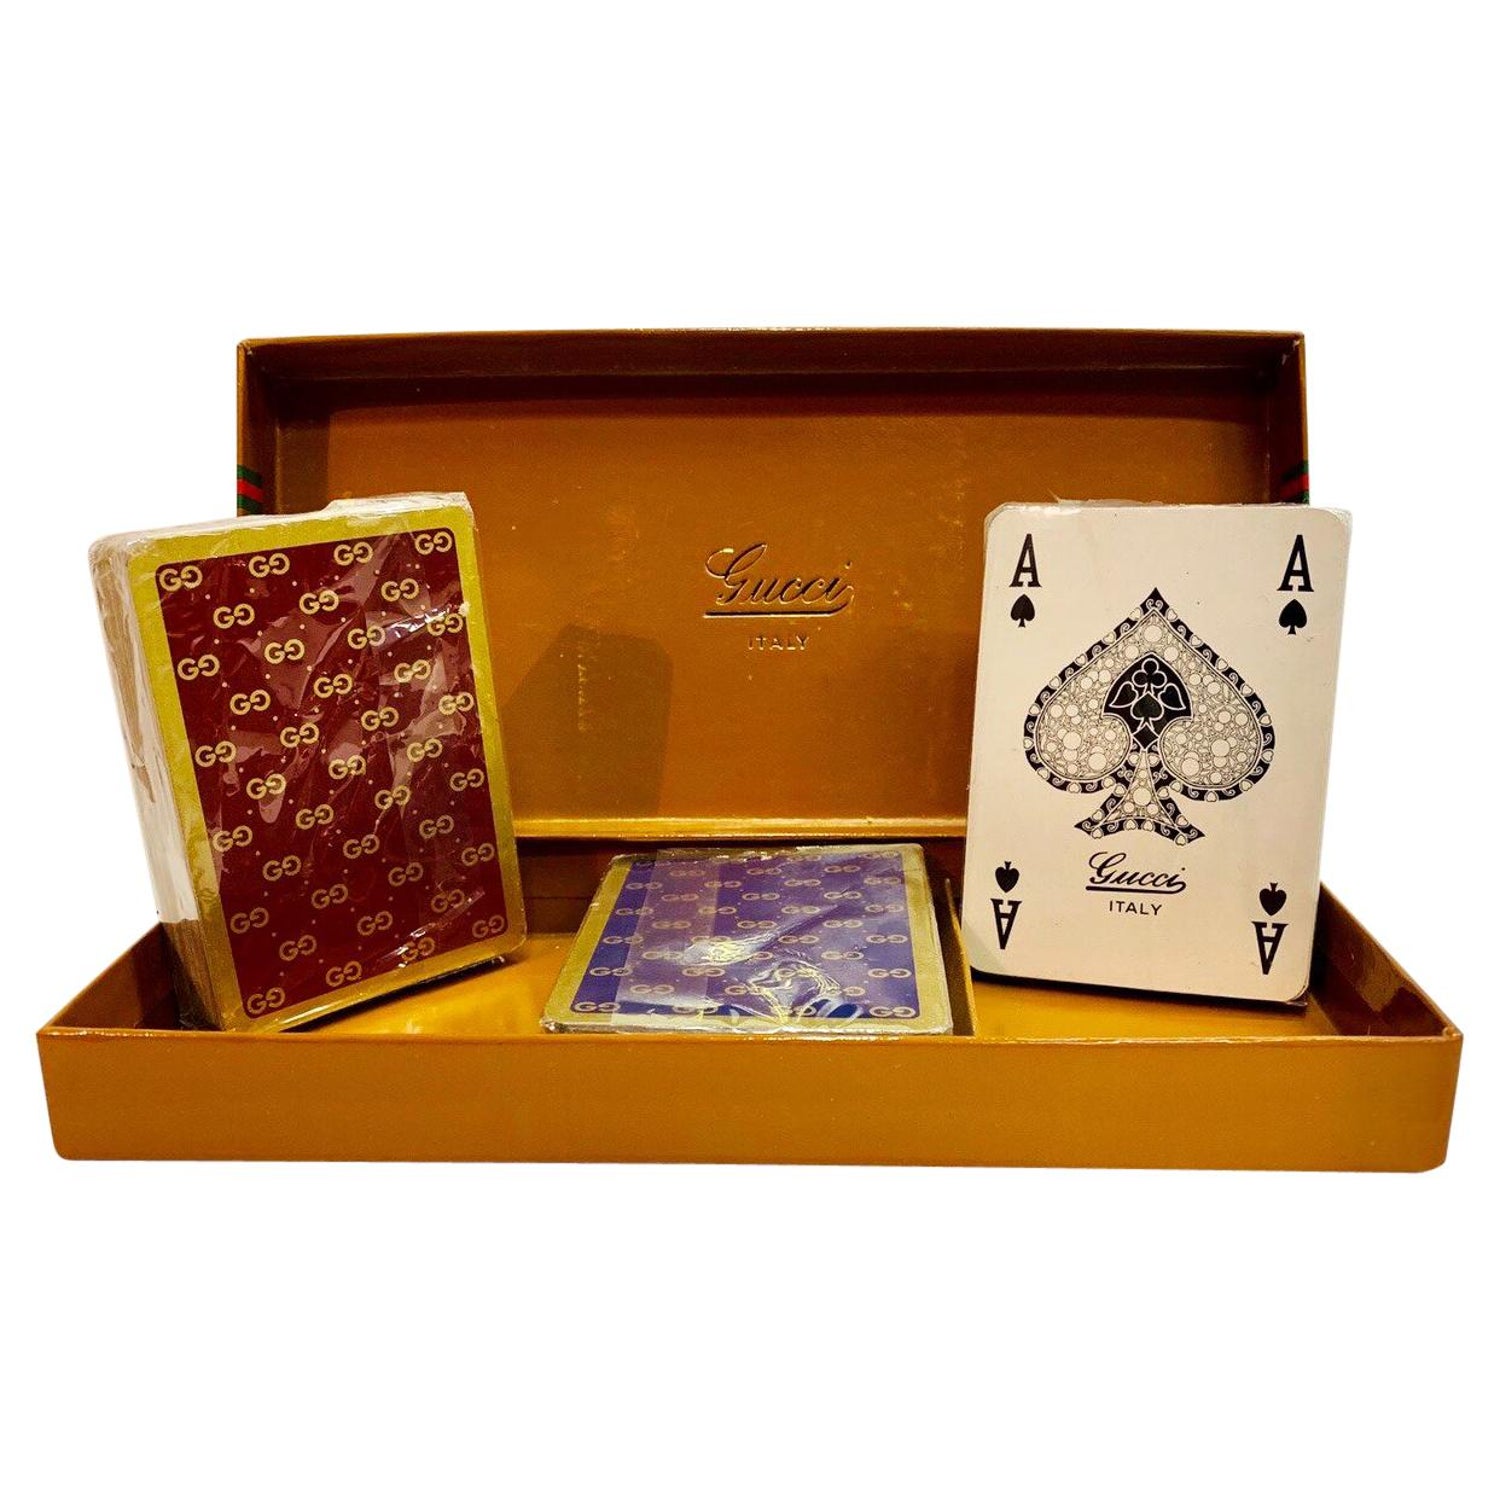 Gucci Playing Cards - 4 For Sale on 1stDibs | gucci playing cards set, gucci  playing cards price, vintage gucci playing cards